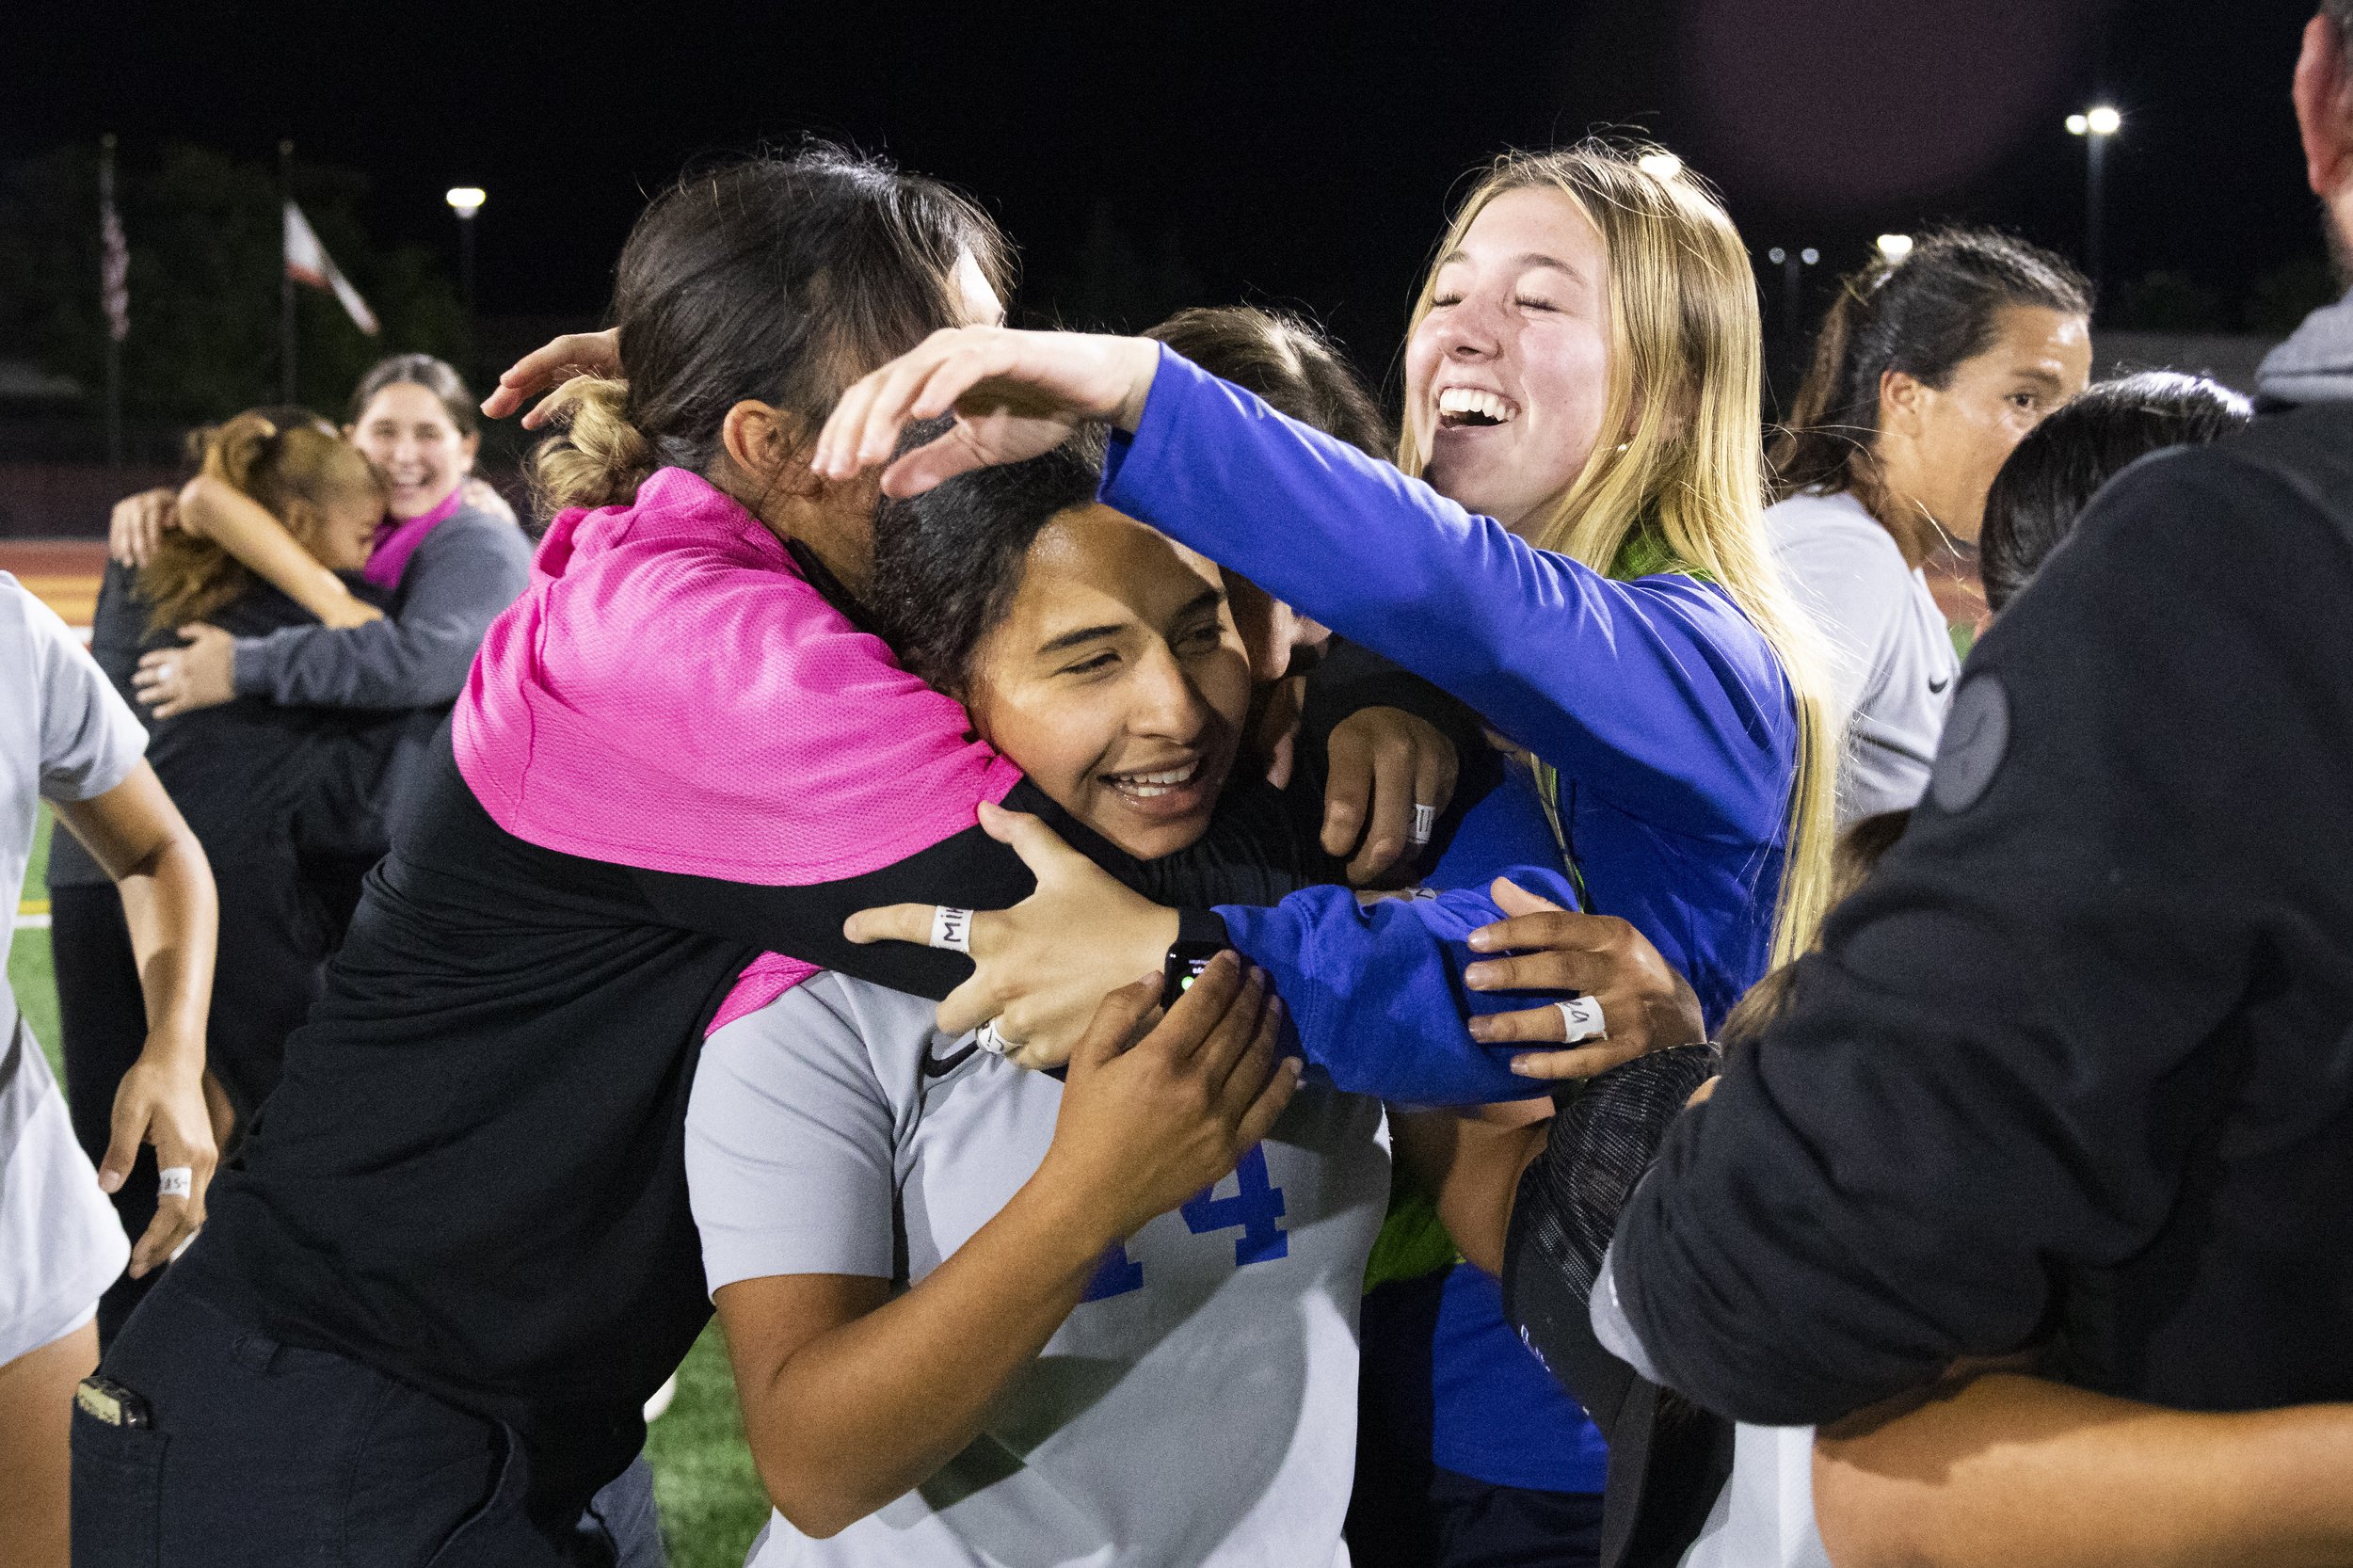  Santa Monica College Corsair midfielder Vashti Zuniga (center) being embraced by her team after they defeated the Saddleback College Bobcats, their first defeat of the season, at Saddleback College in Mission Viejo, Calif., on Tuesday, Nov. 21, 2023